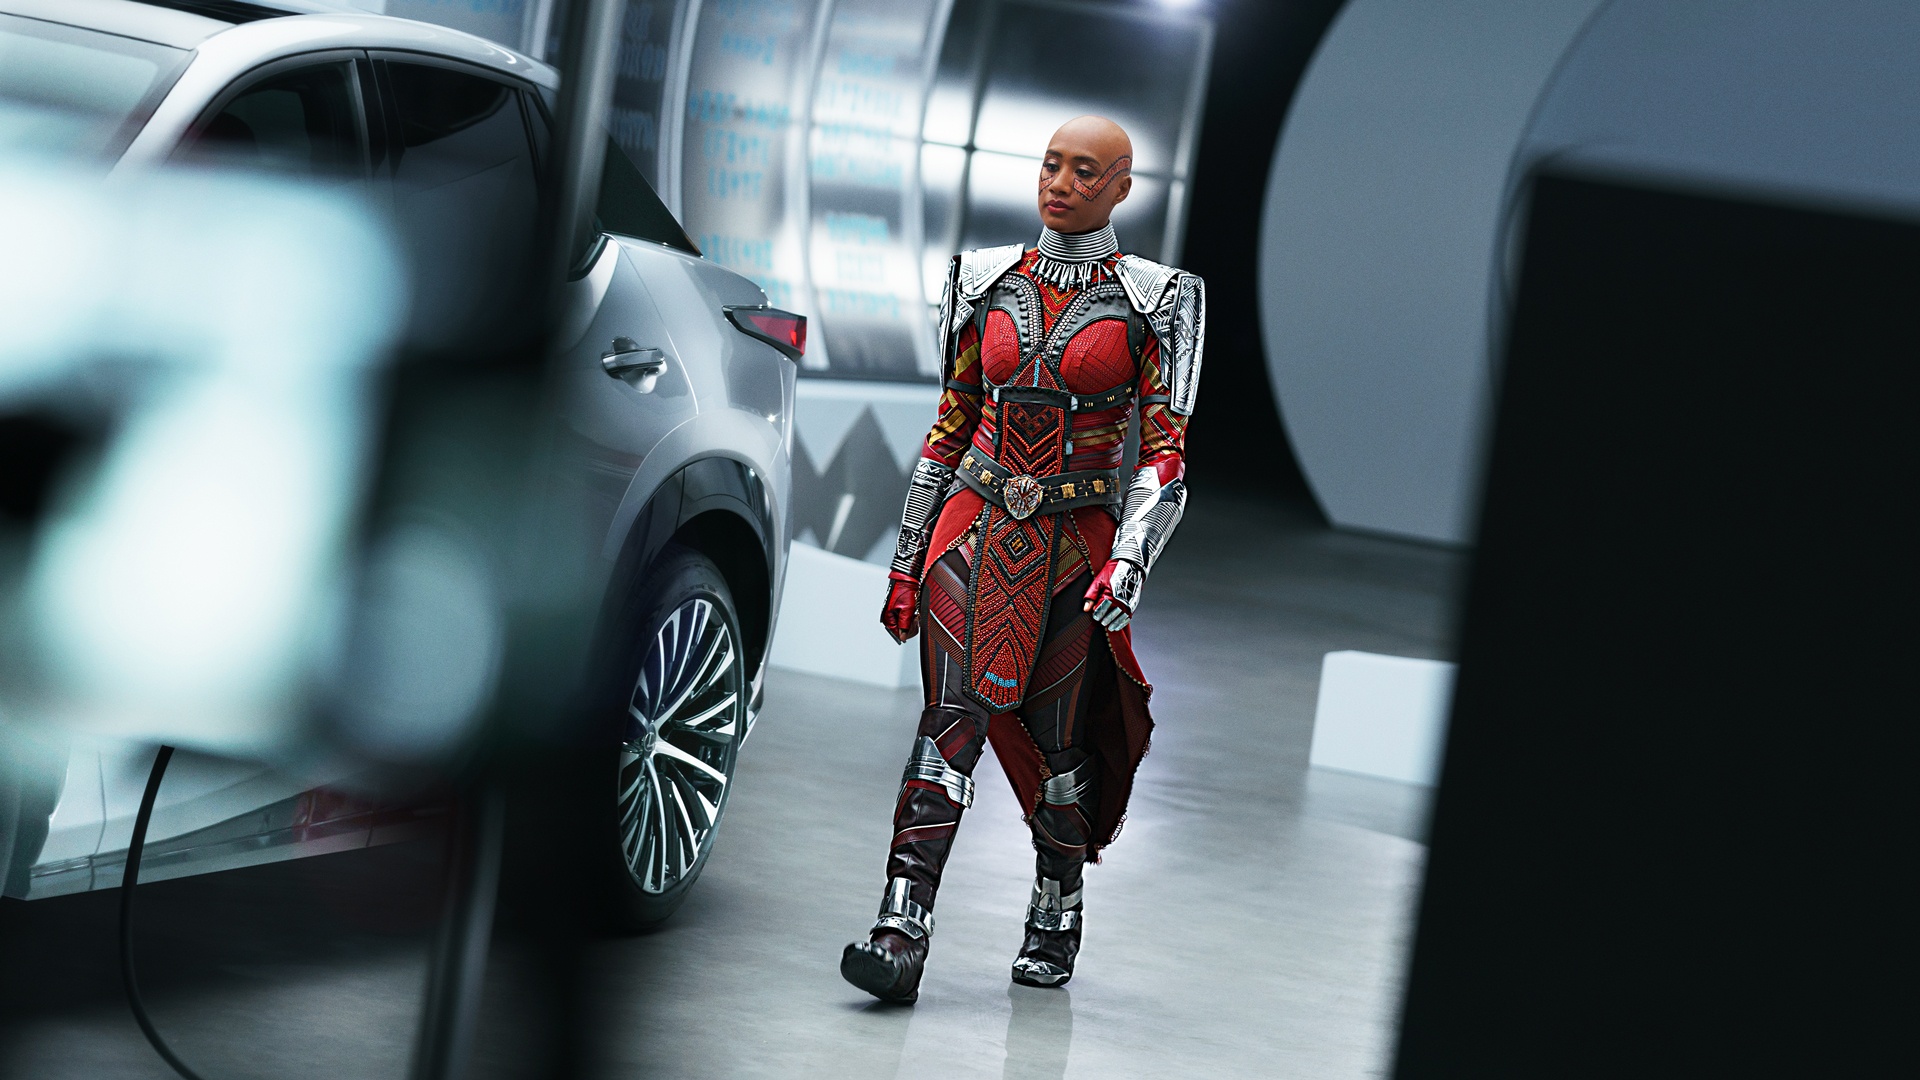 Lexus And Black Panther: Wakanda Forever Drive Into The Future Of Automotive With New Partnership